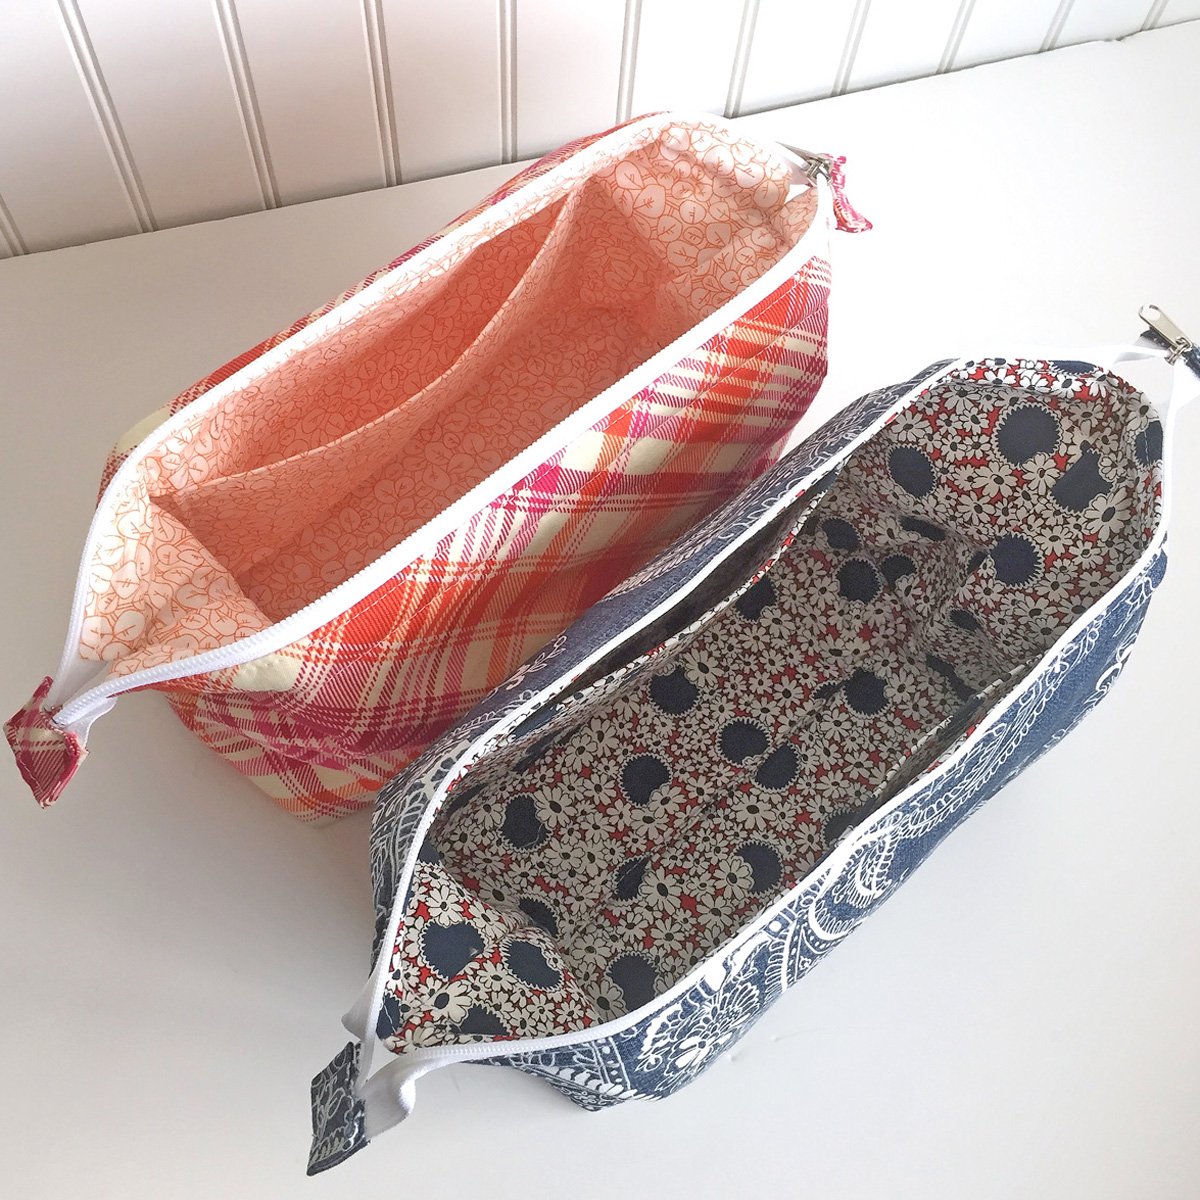 Emmaline Bags: Sewing Patterns and Purse Supplies: The Retreat Bag - A